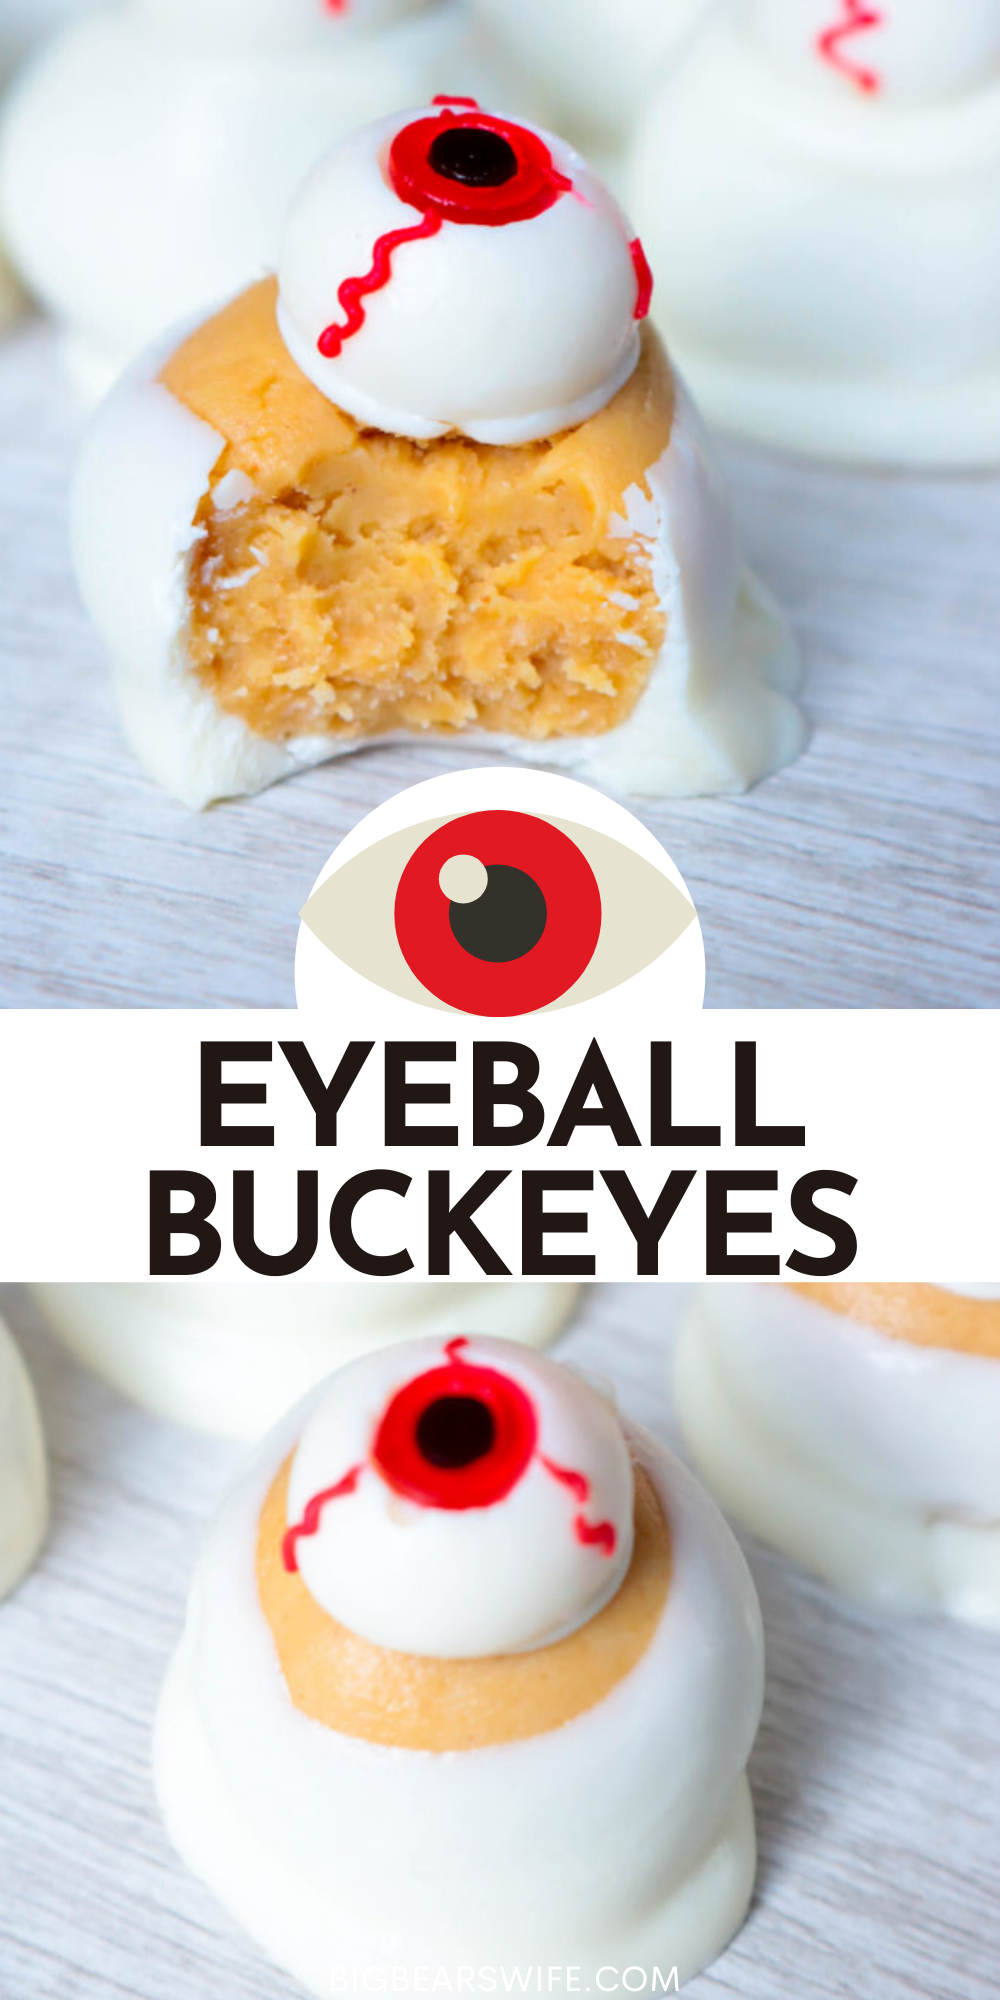 Simple and wickedly tasty peanut butter Halloween eyeball Buckeyes are watching you! I've got the recipe for you and 3 different ideas for decorating them!  via @bigbearswife